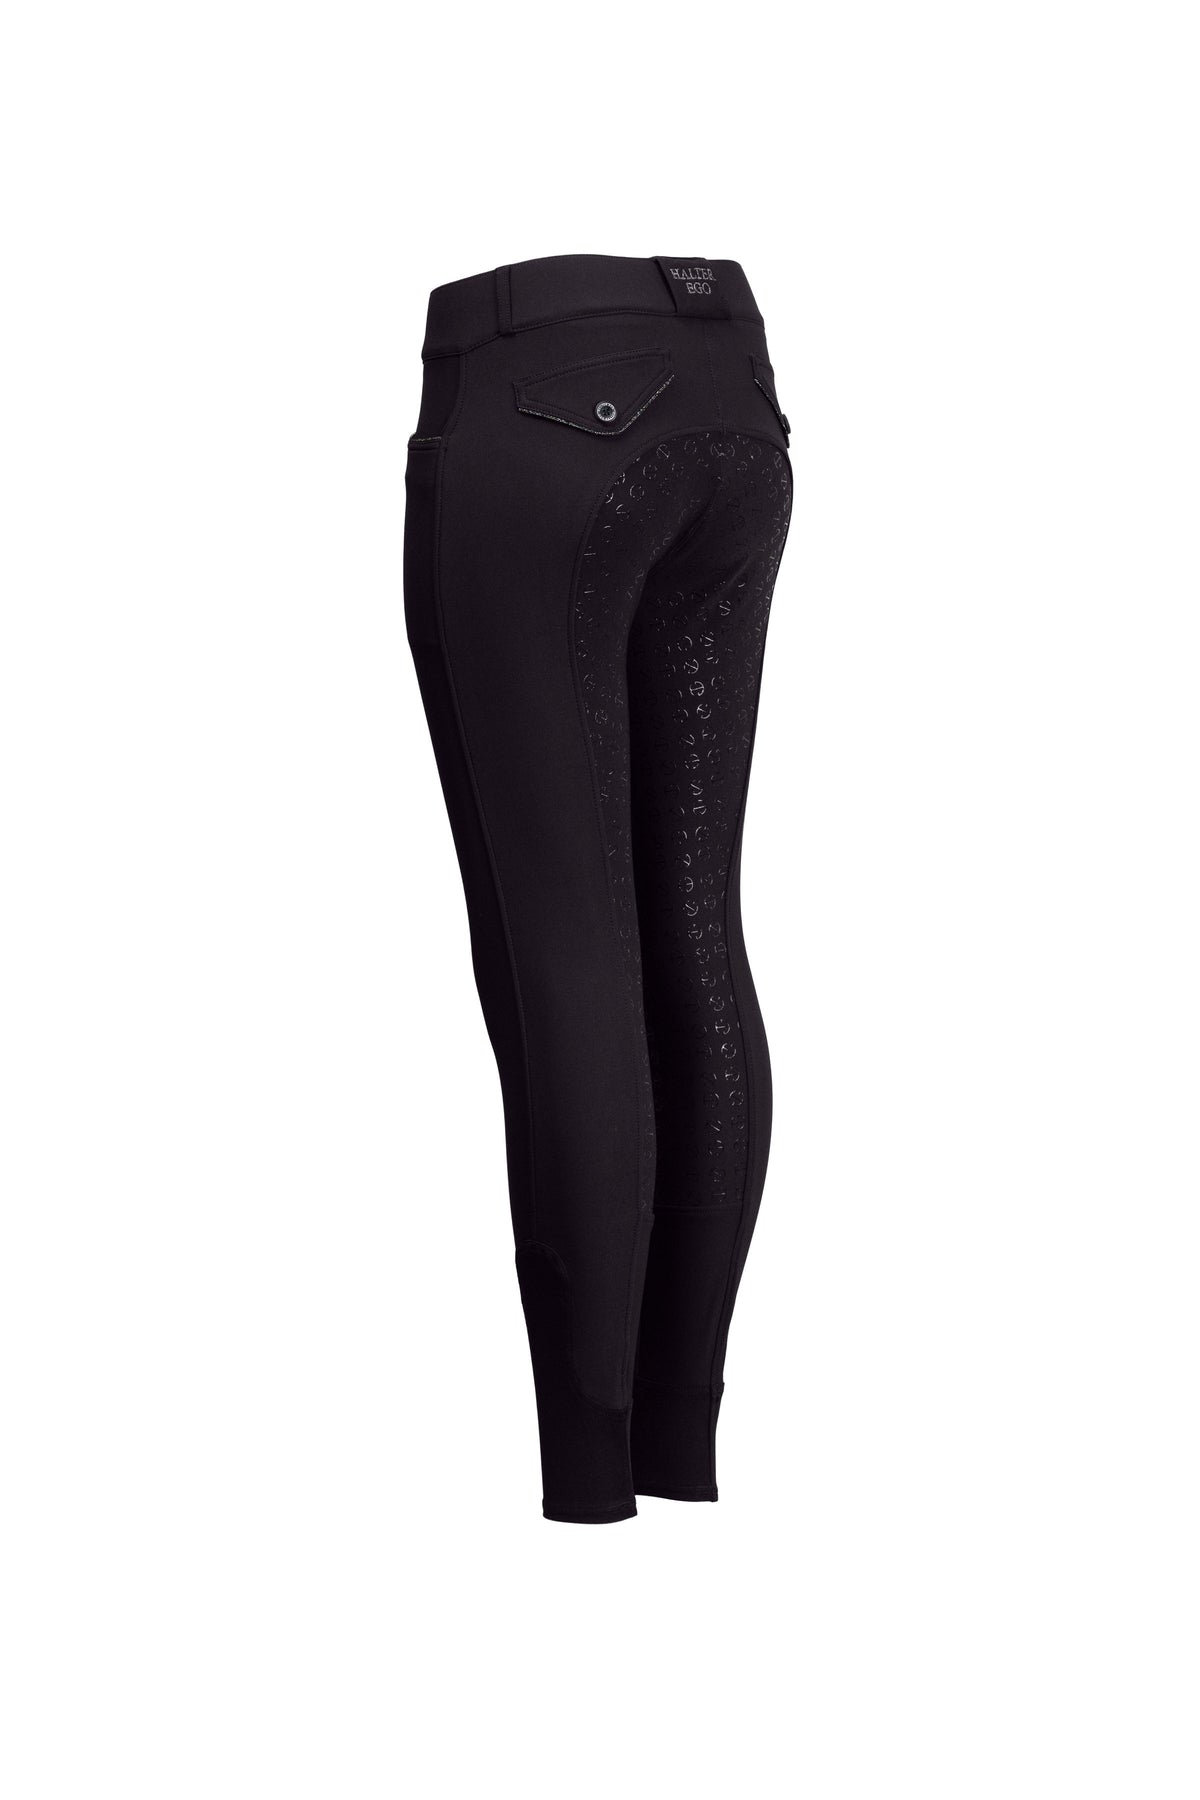 Evolution Full Seat Breeches - Black with Anthracite